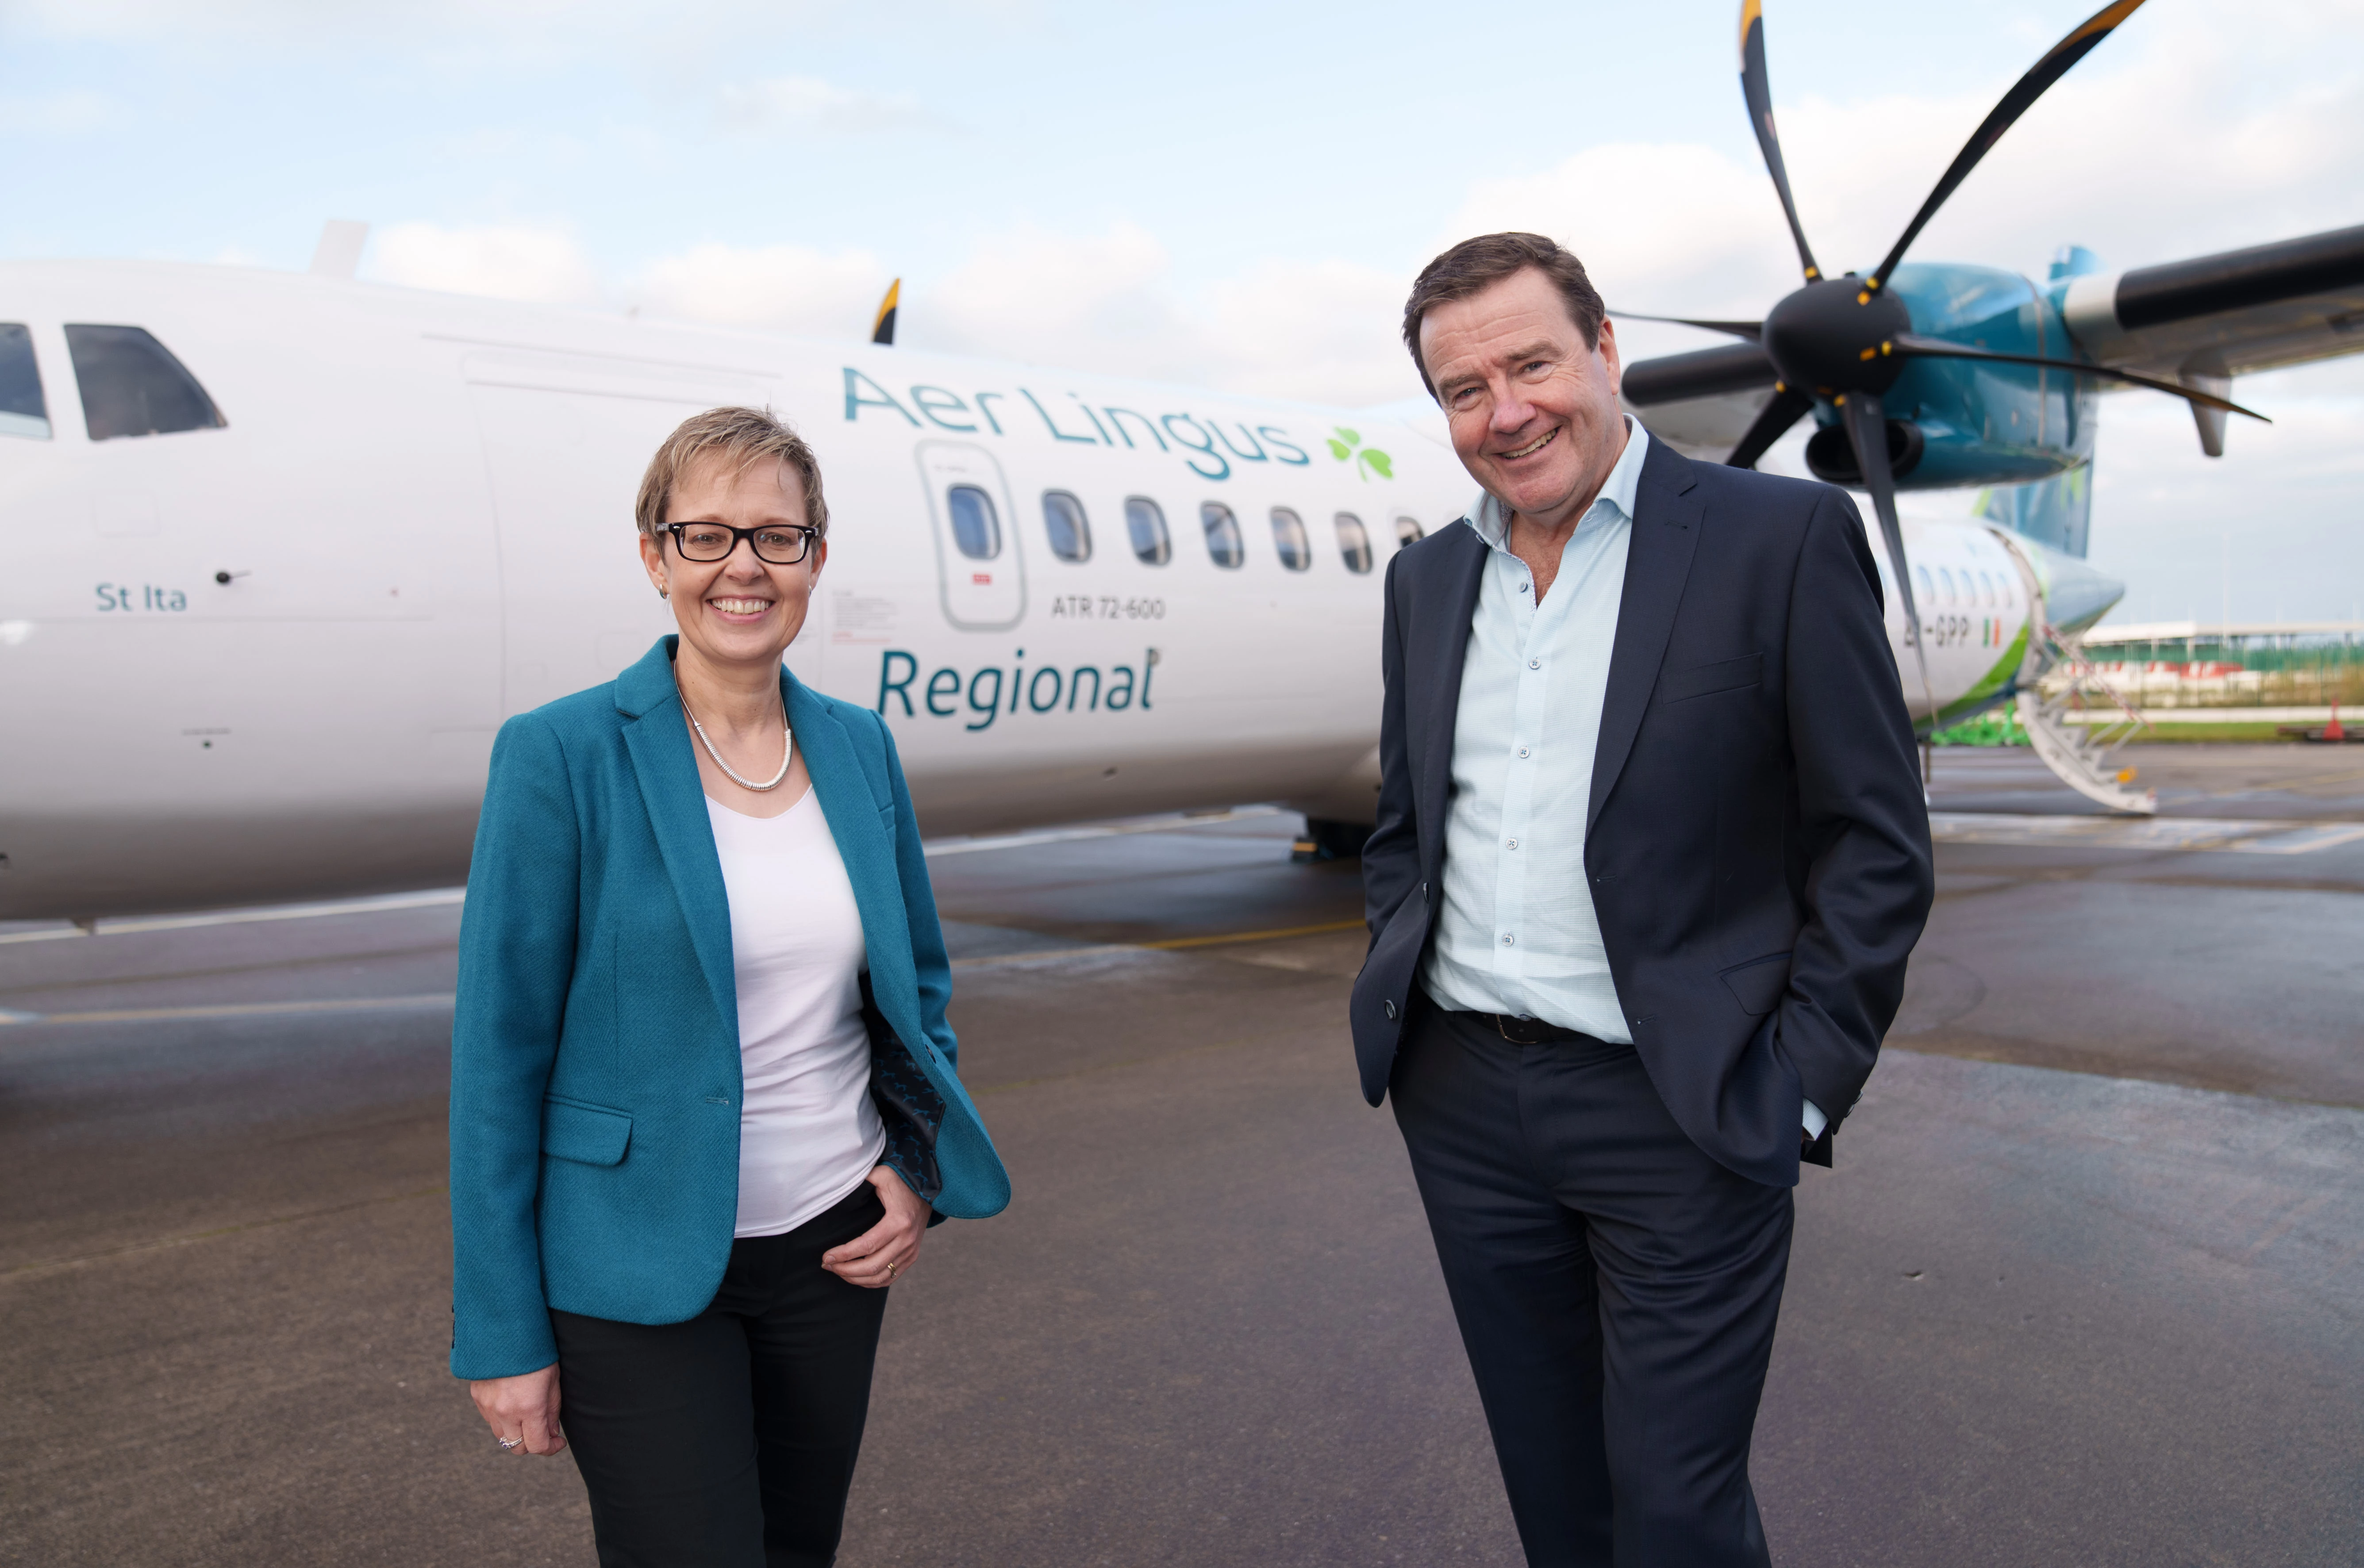 Aer Lingus CEO Lynne Embleton with Emerald Airlines CEO Conor McCarthy